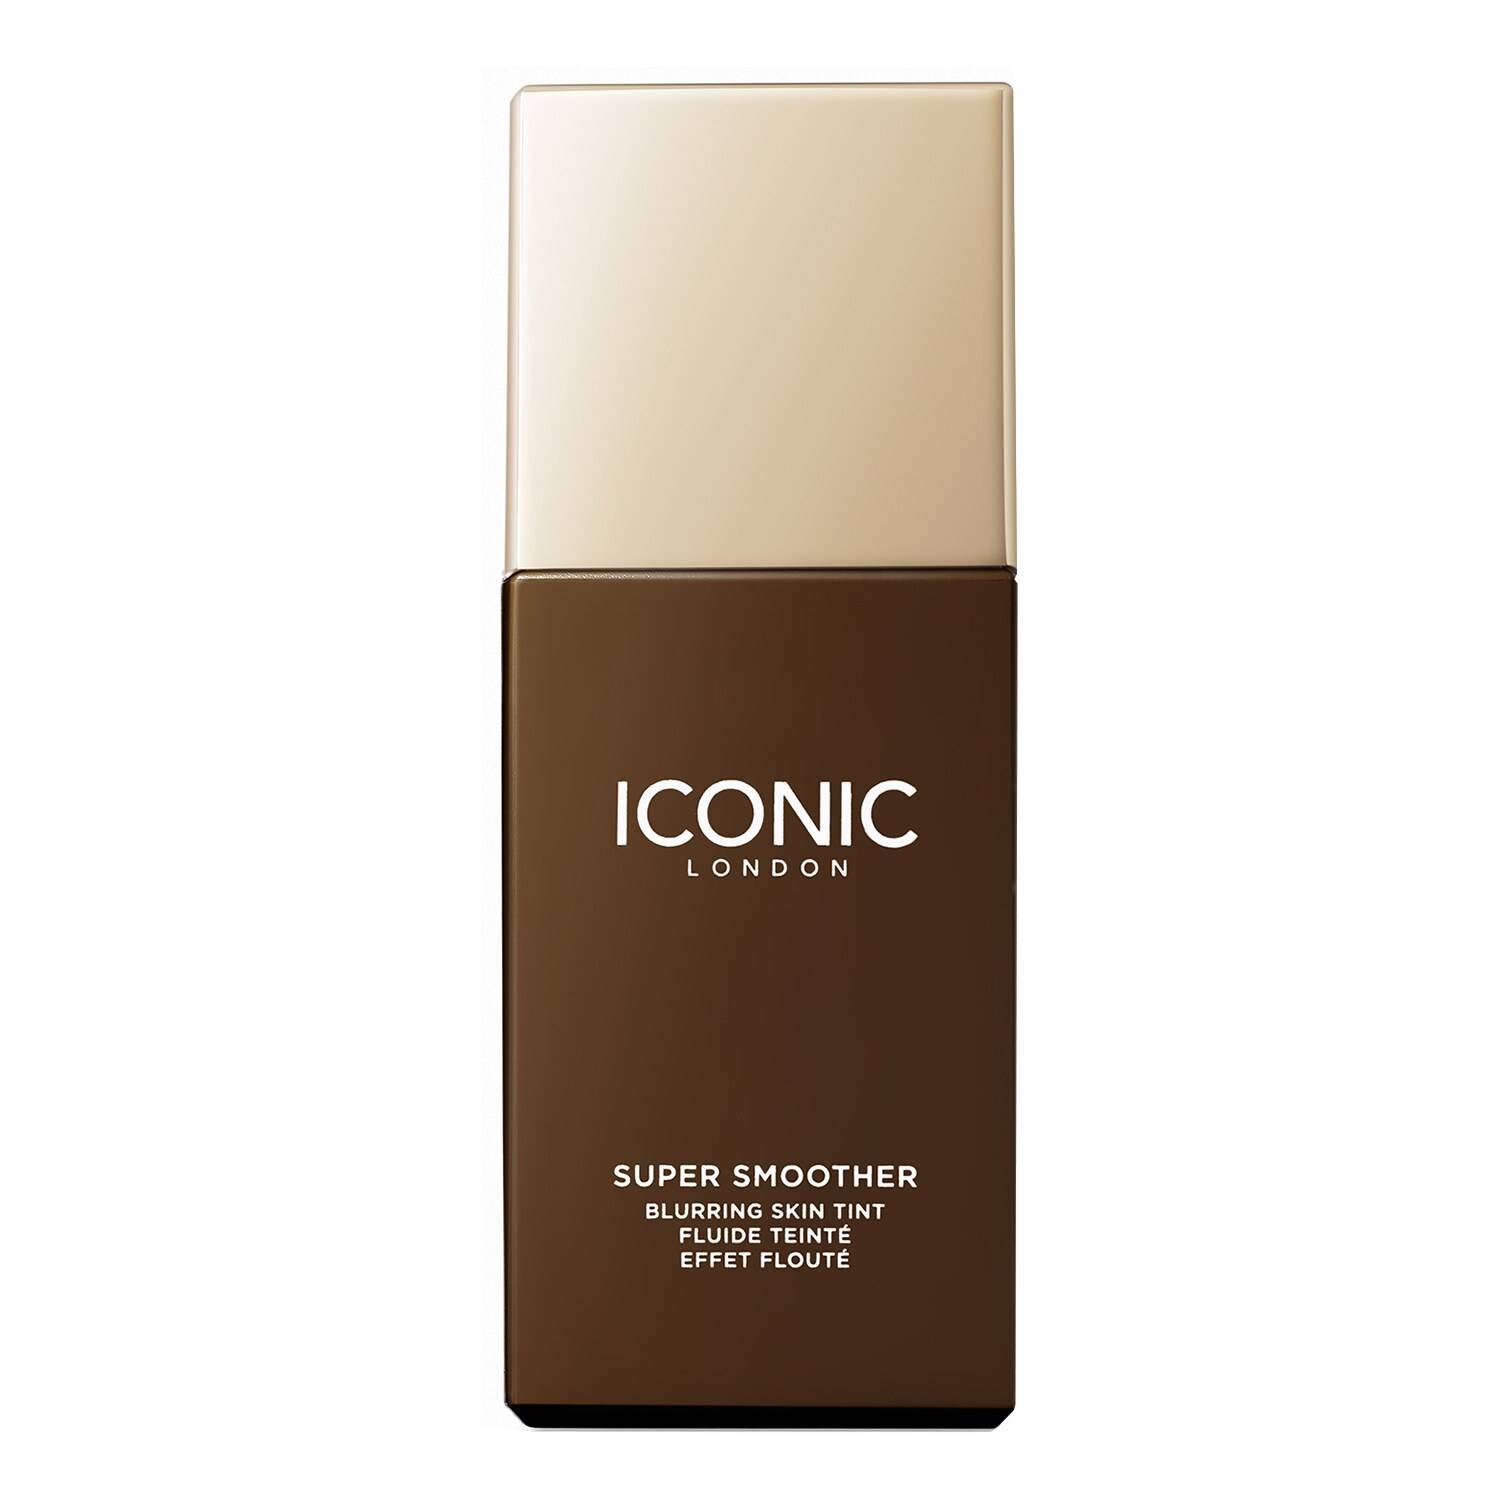 Iconic London Super Smoother Blurring Skin Tint 30Ml Golden Rich